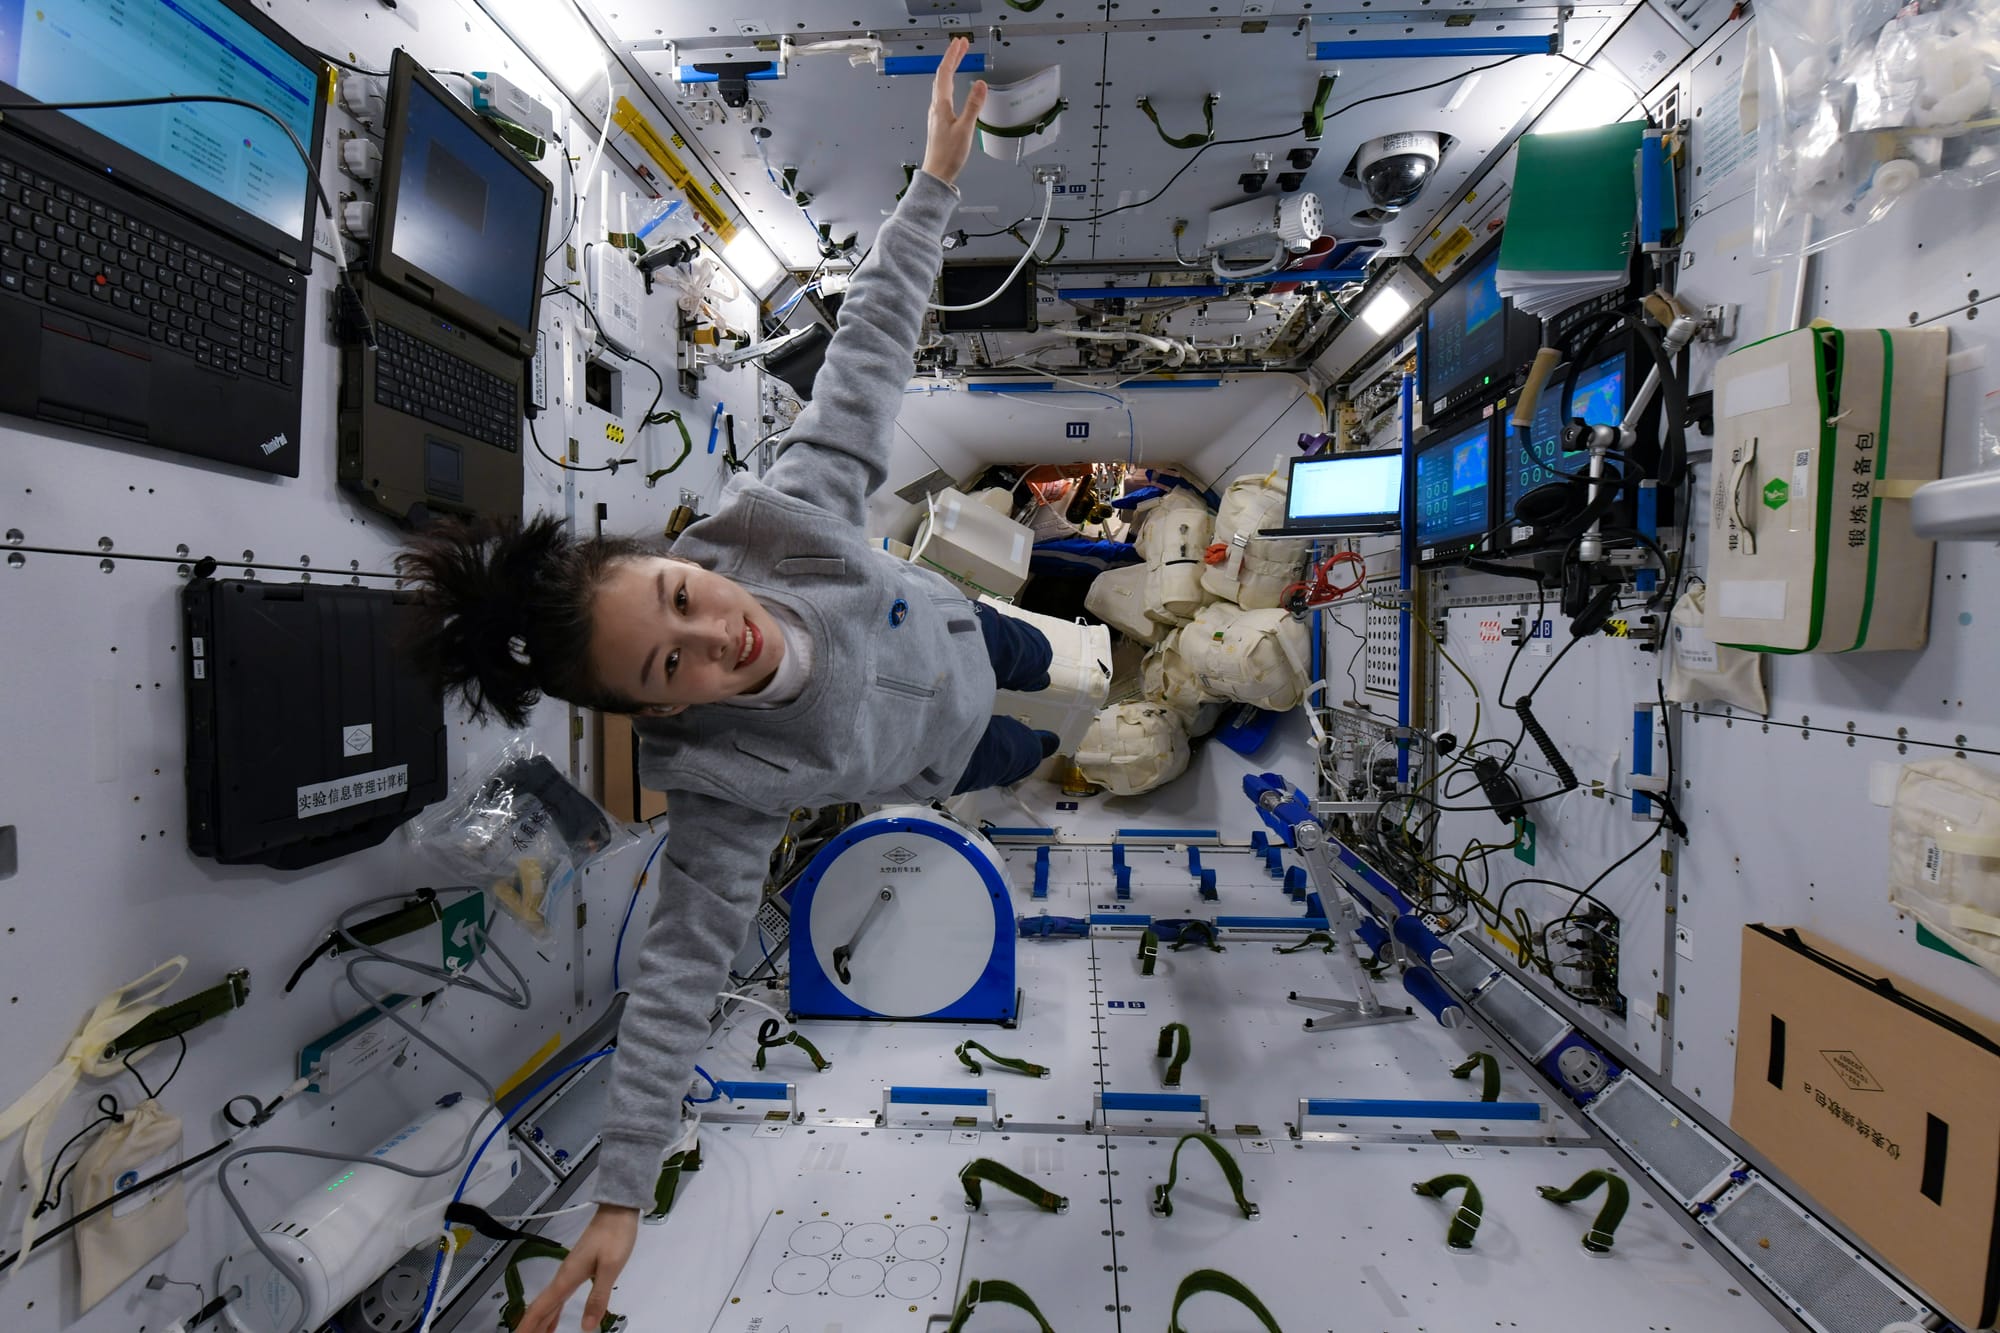 Wang Yaping floating around inside the Tianhe module. ©China Manned Space Agency